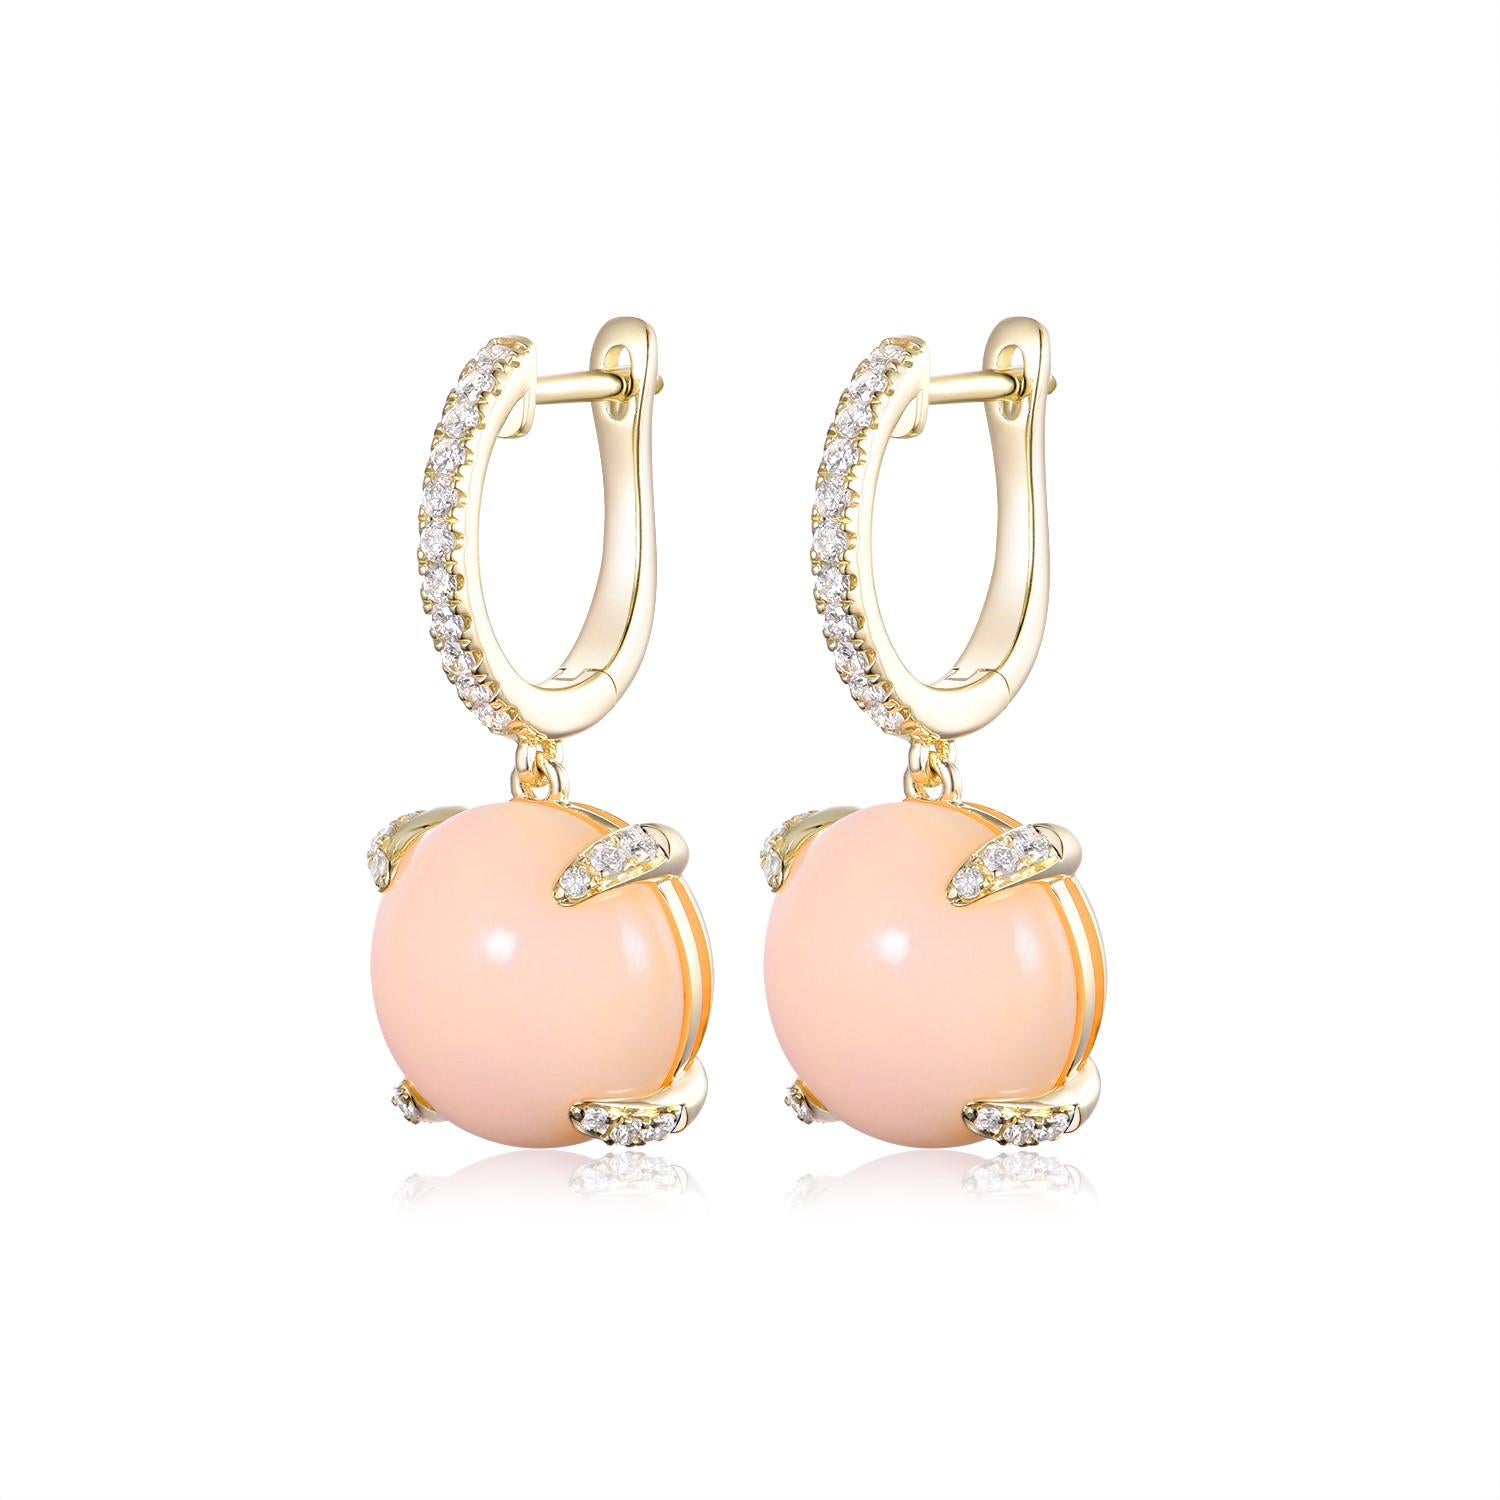 Indulge in the sublime elegance of these Angel Skin Coral and Diamond Earrings, a luxurious addition to any fine jewelry collection. Each earring features a sumptuous 14.10-carat Angel Skin Coral, celebrated for its delicate peach-pink hue that